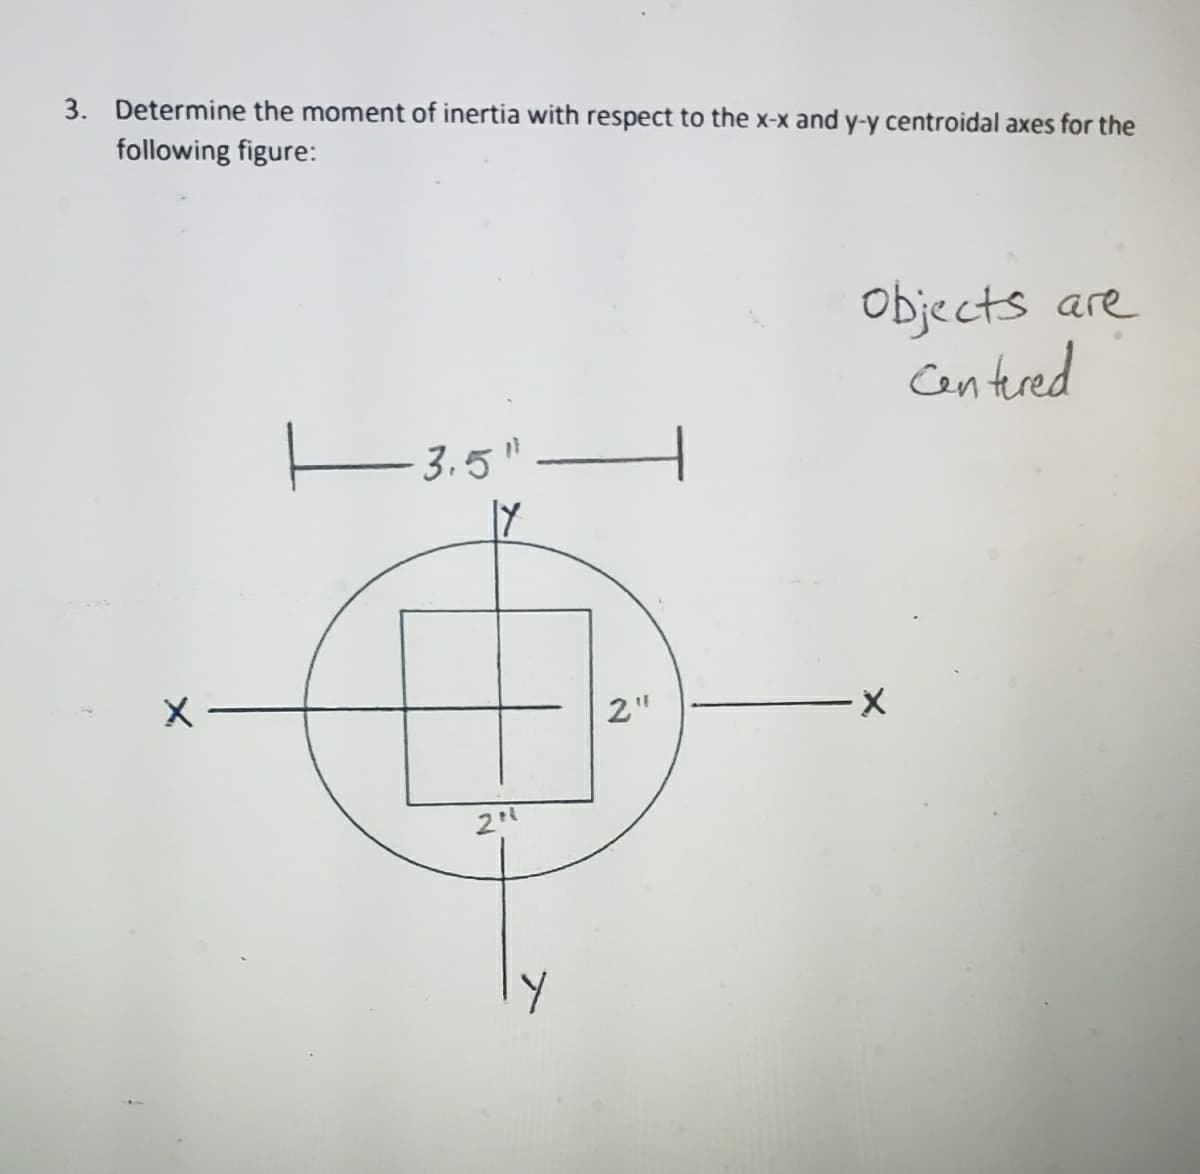 3. Determine the moment of inertia with respect to the x-x and y-y centroidal axes for the
following figure:
Objects are
Cen tured
E3.5"
2"
